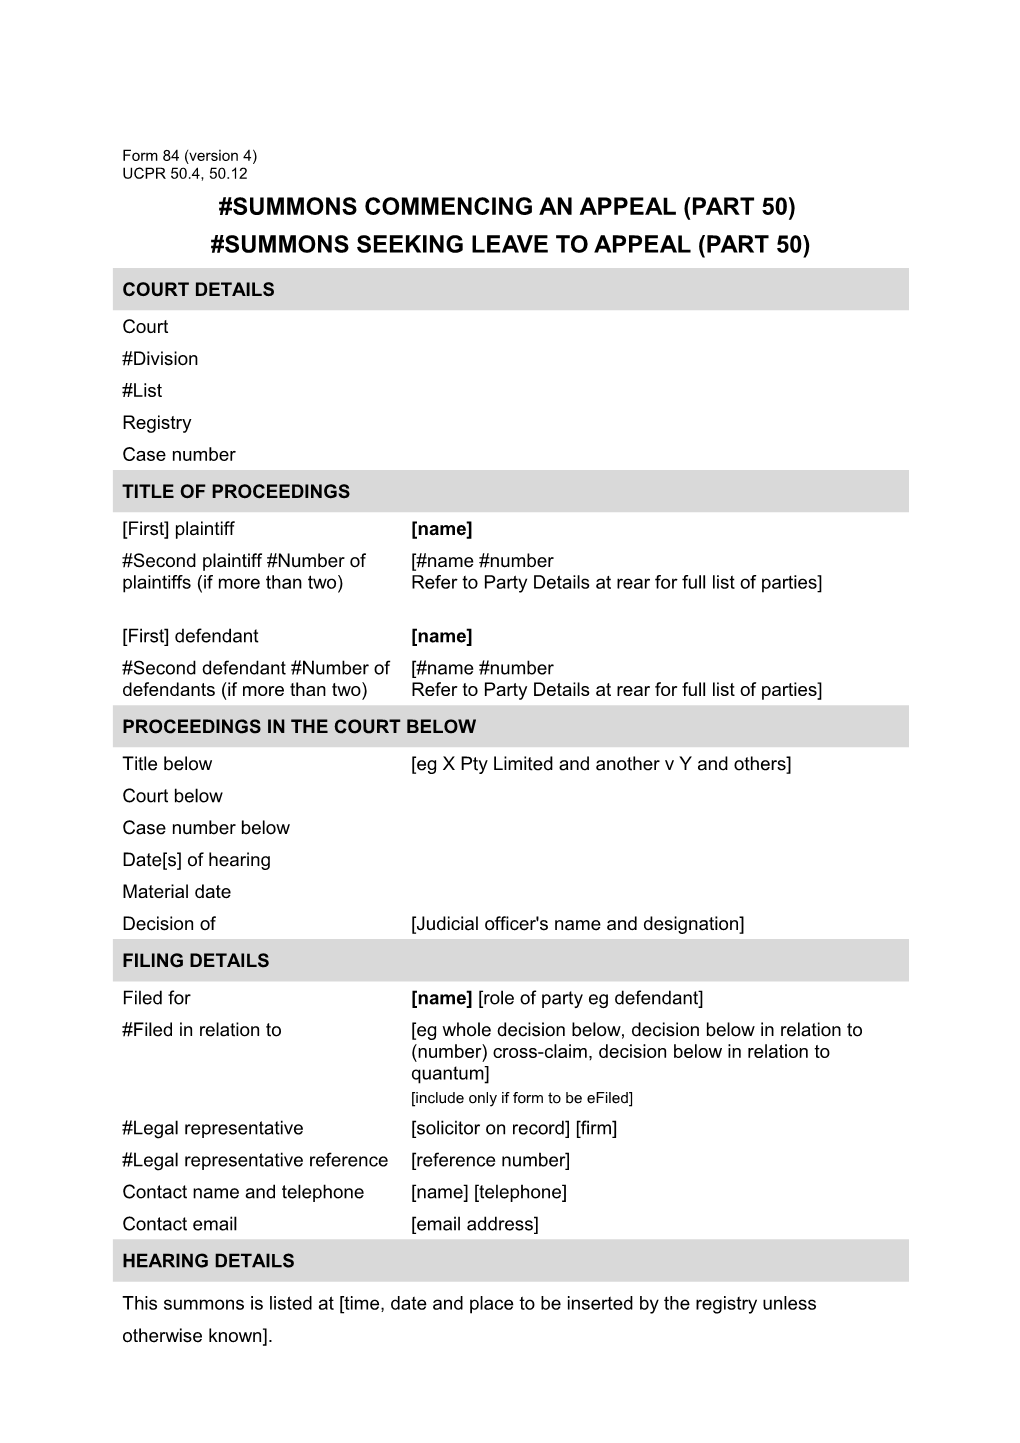 NSW UCPR Form 84 - Summons Commencing an Appeal (Part 50 Appeals)